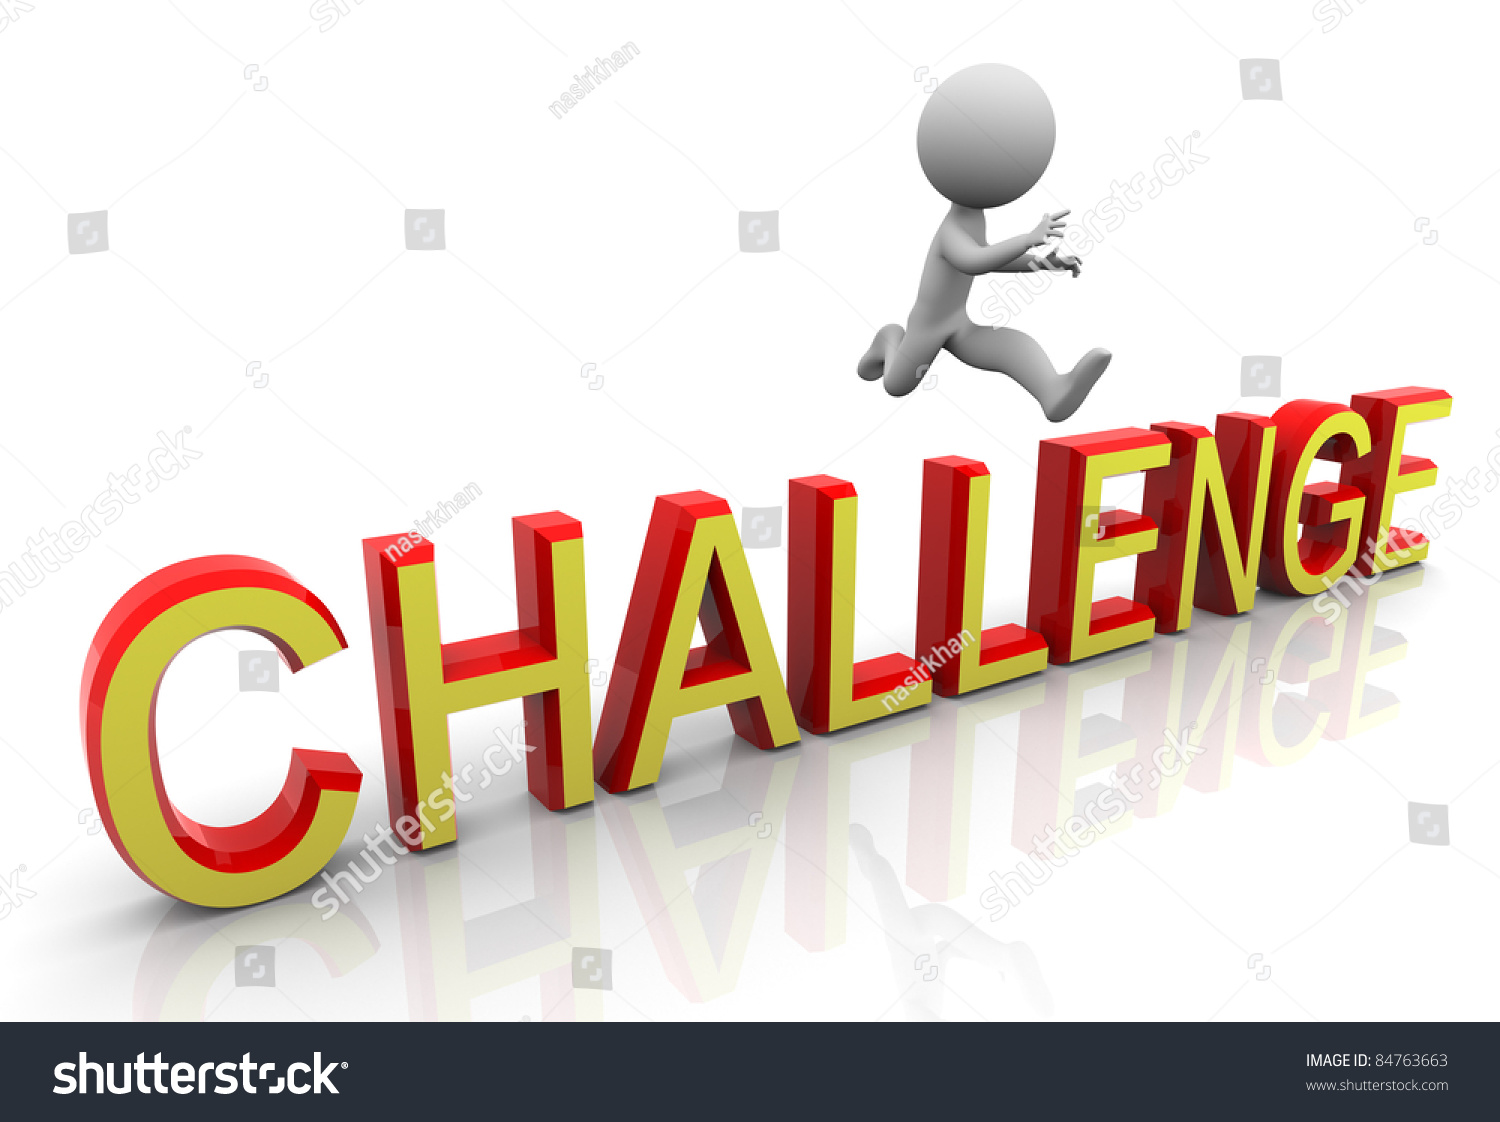 3d Man Jumping Over The Text 'Challenge' Stock Photo 84763663 ...